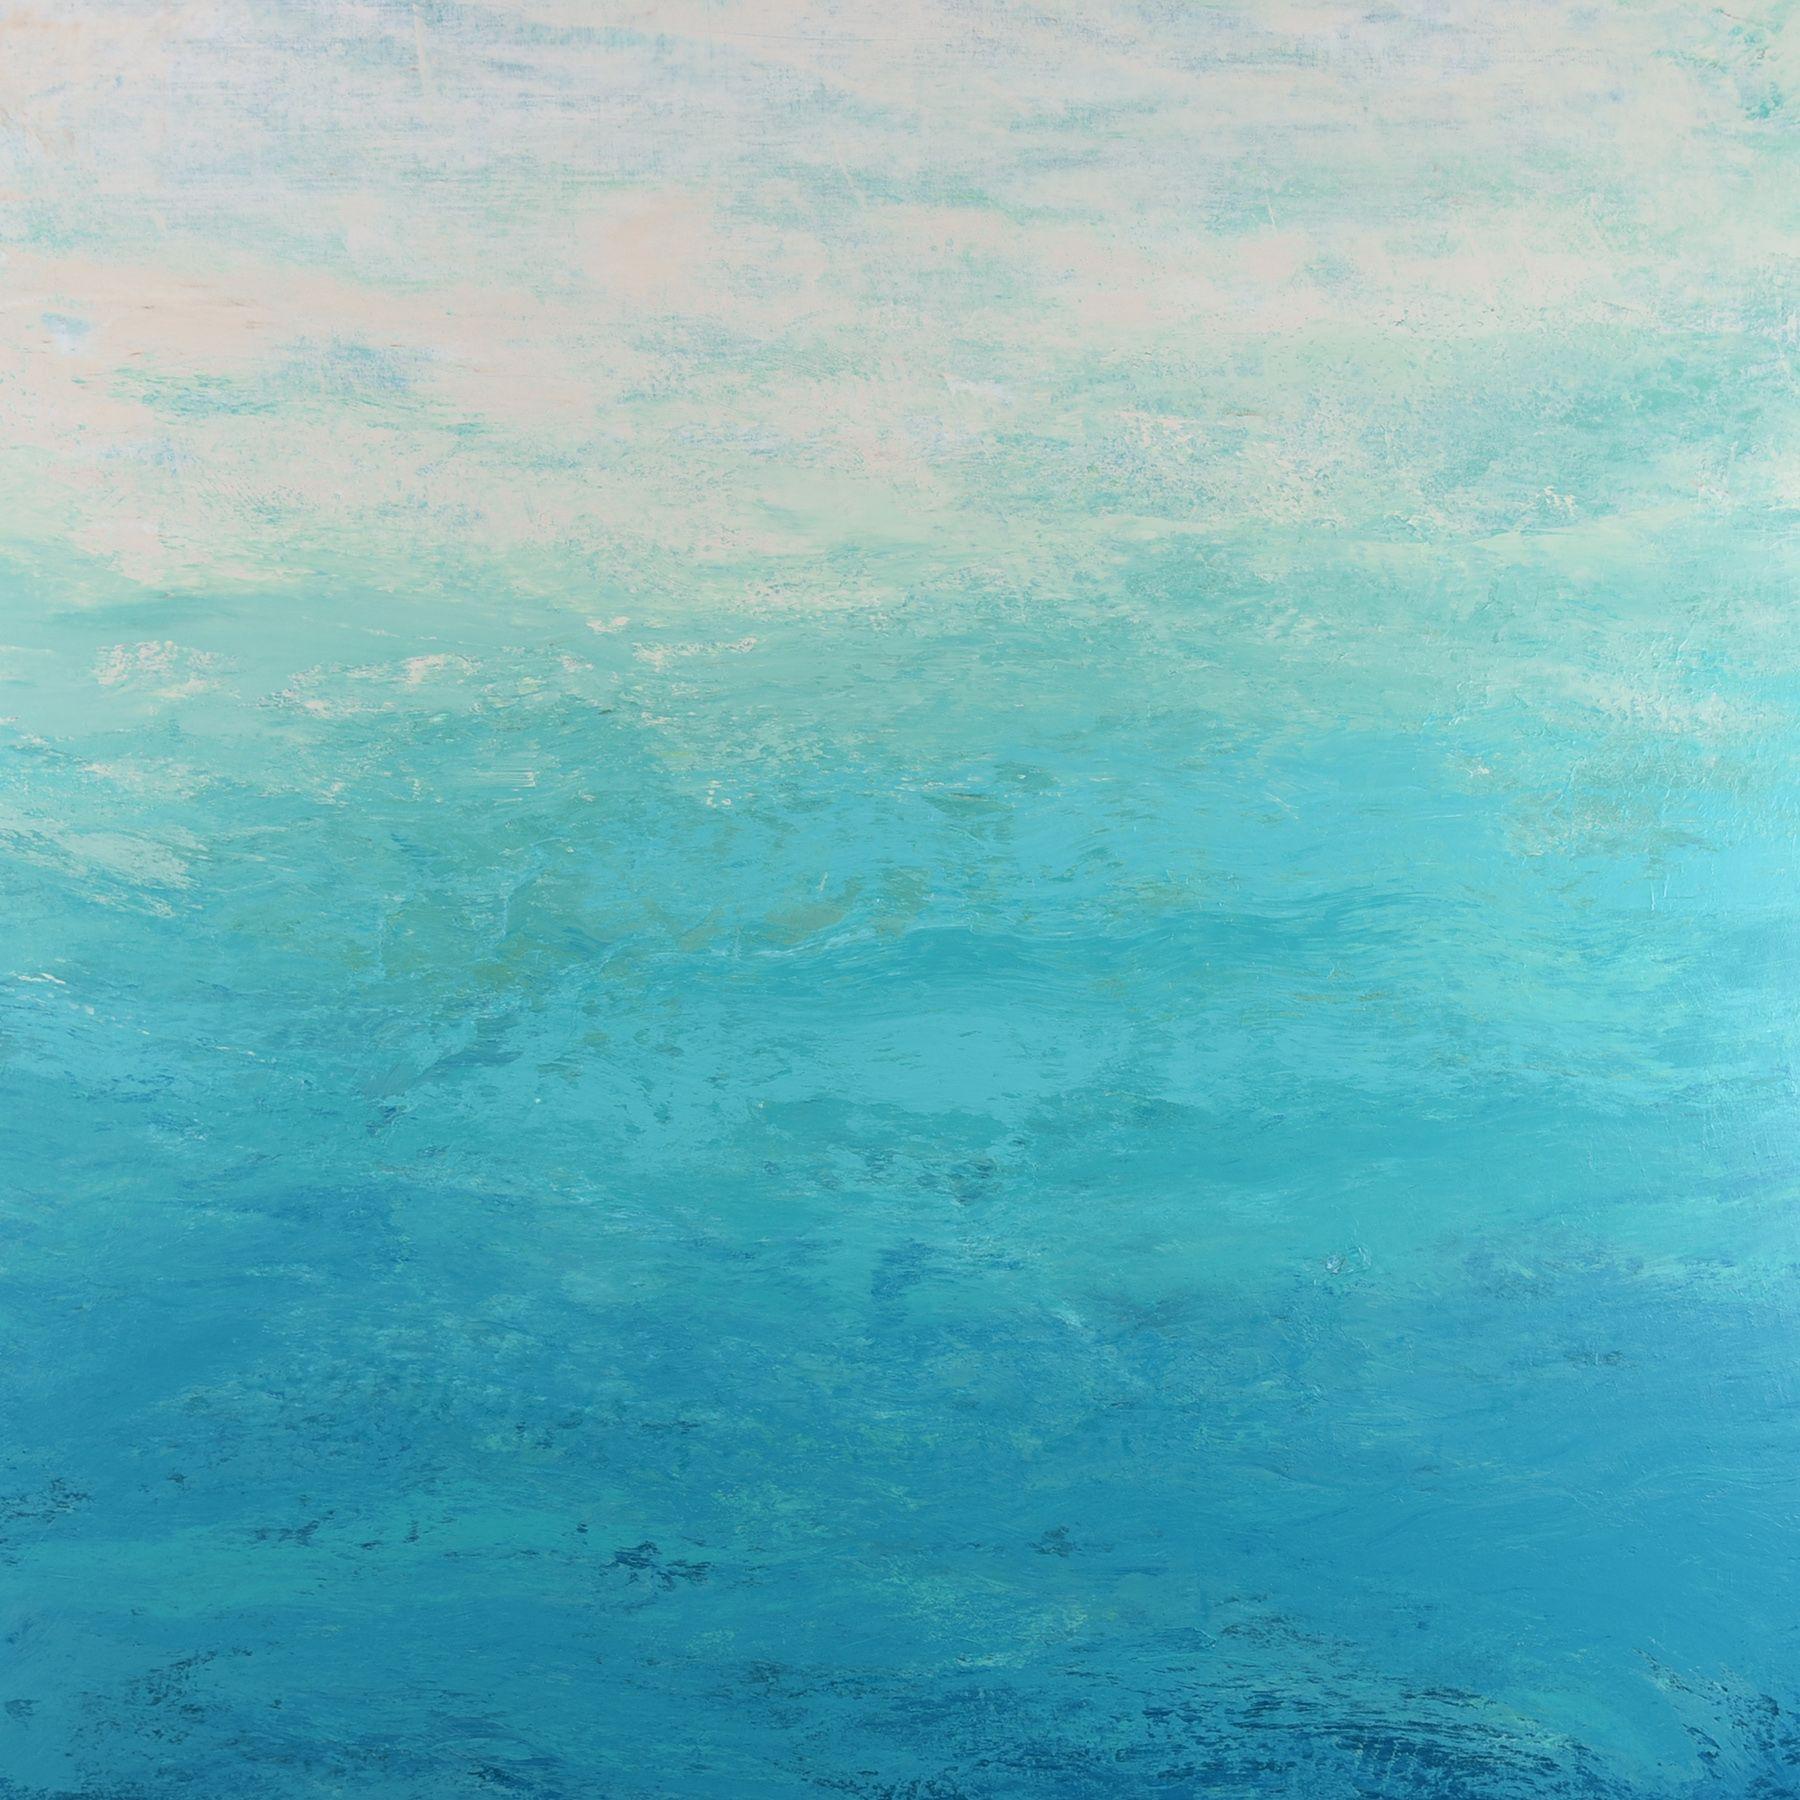 Sea to Sky is an original acrylic painting on canvas by Suzanne Vaughan. An abstract expressionist style painting with thick layers of acrylic paint in turquoise, teal and warm white. Paint is applied to the canvas in free gestural marks with